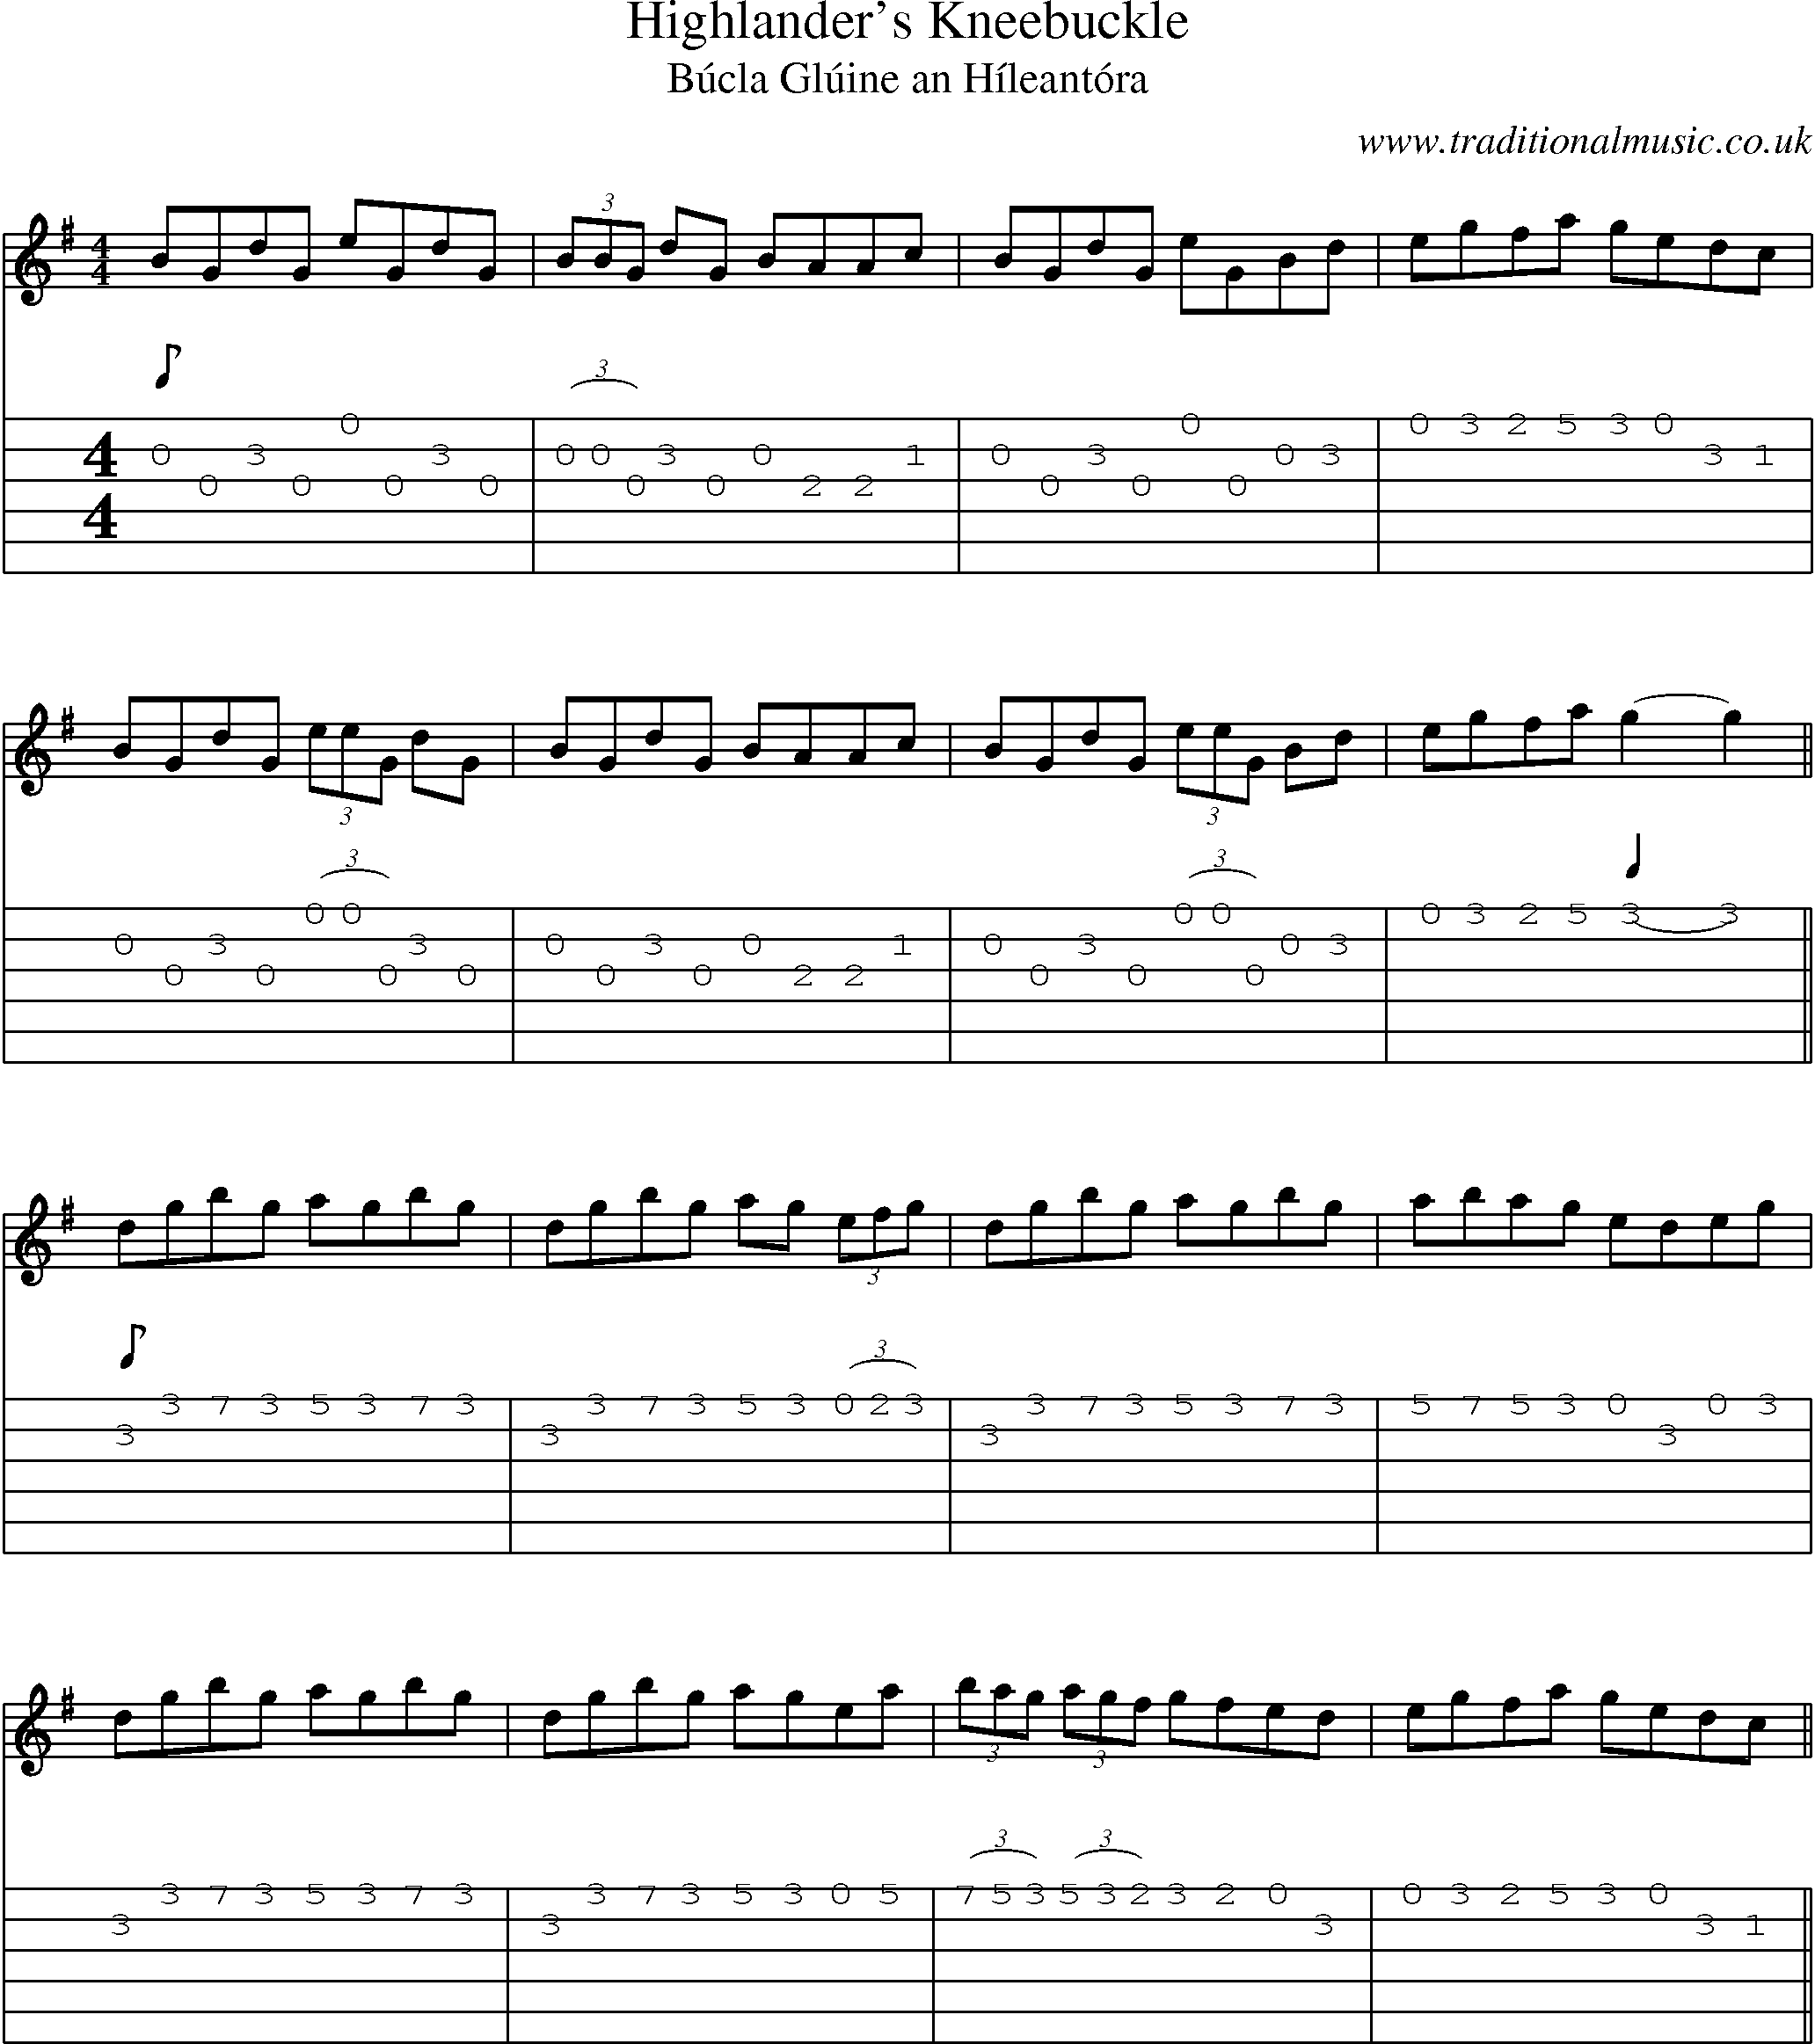 Music Score and Guitar Tabs for Highlanders Kneebuckle